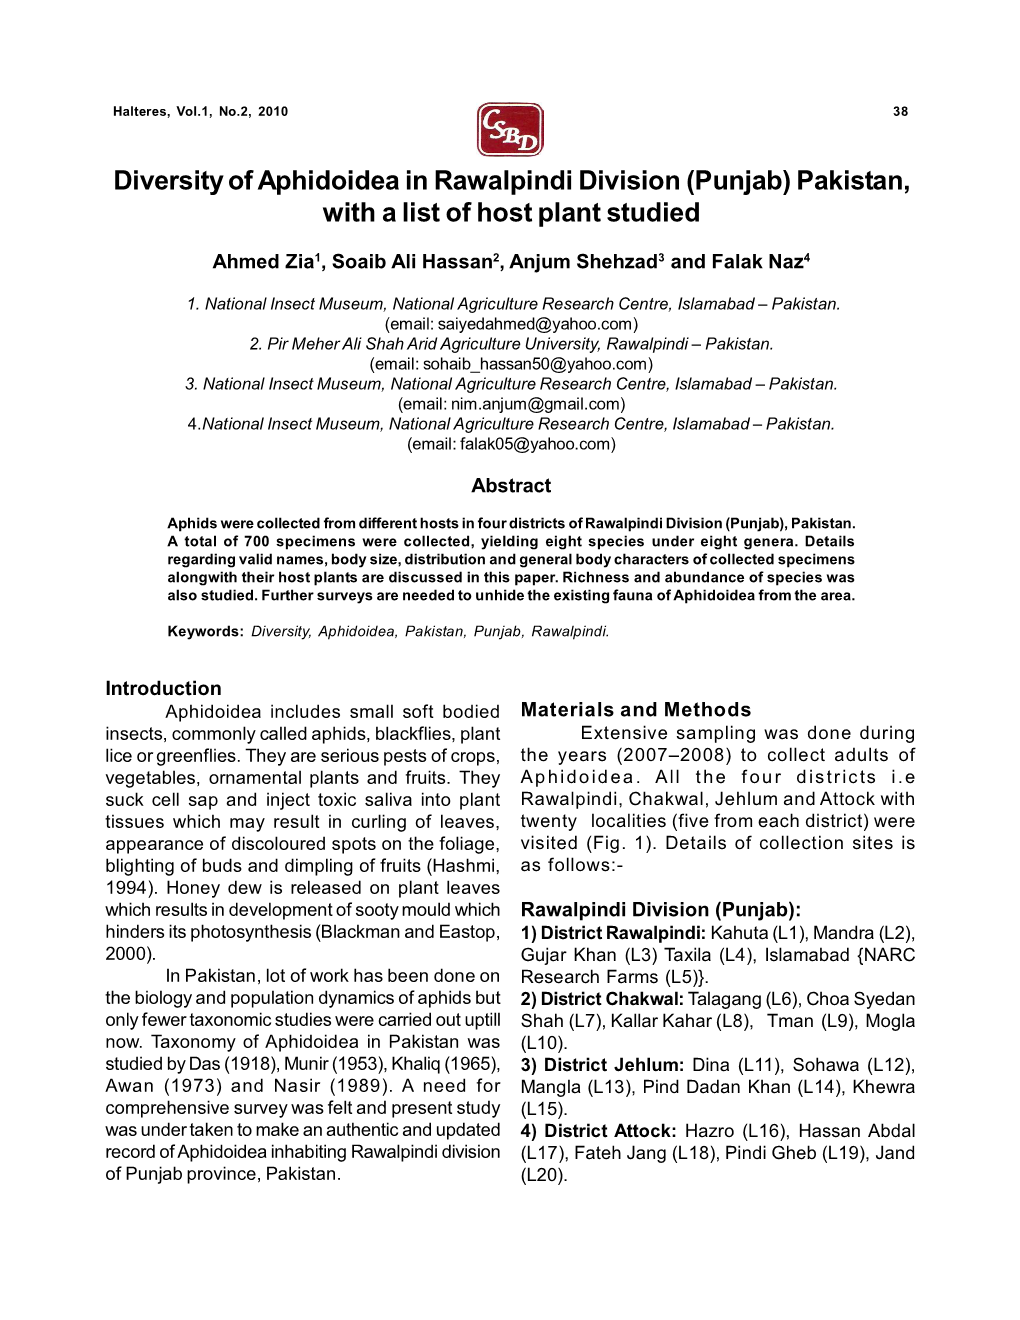 Diversity of Aphidoidea in Rawalpindi Division (Punjab) Pakistan, with a List of Host Plant Studied